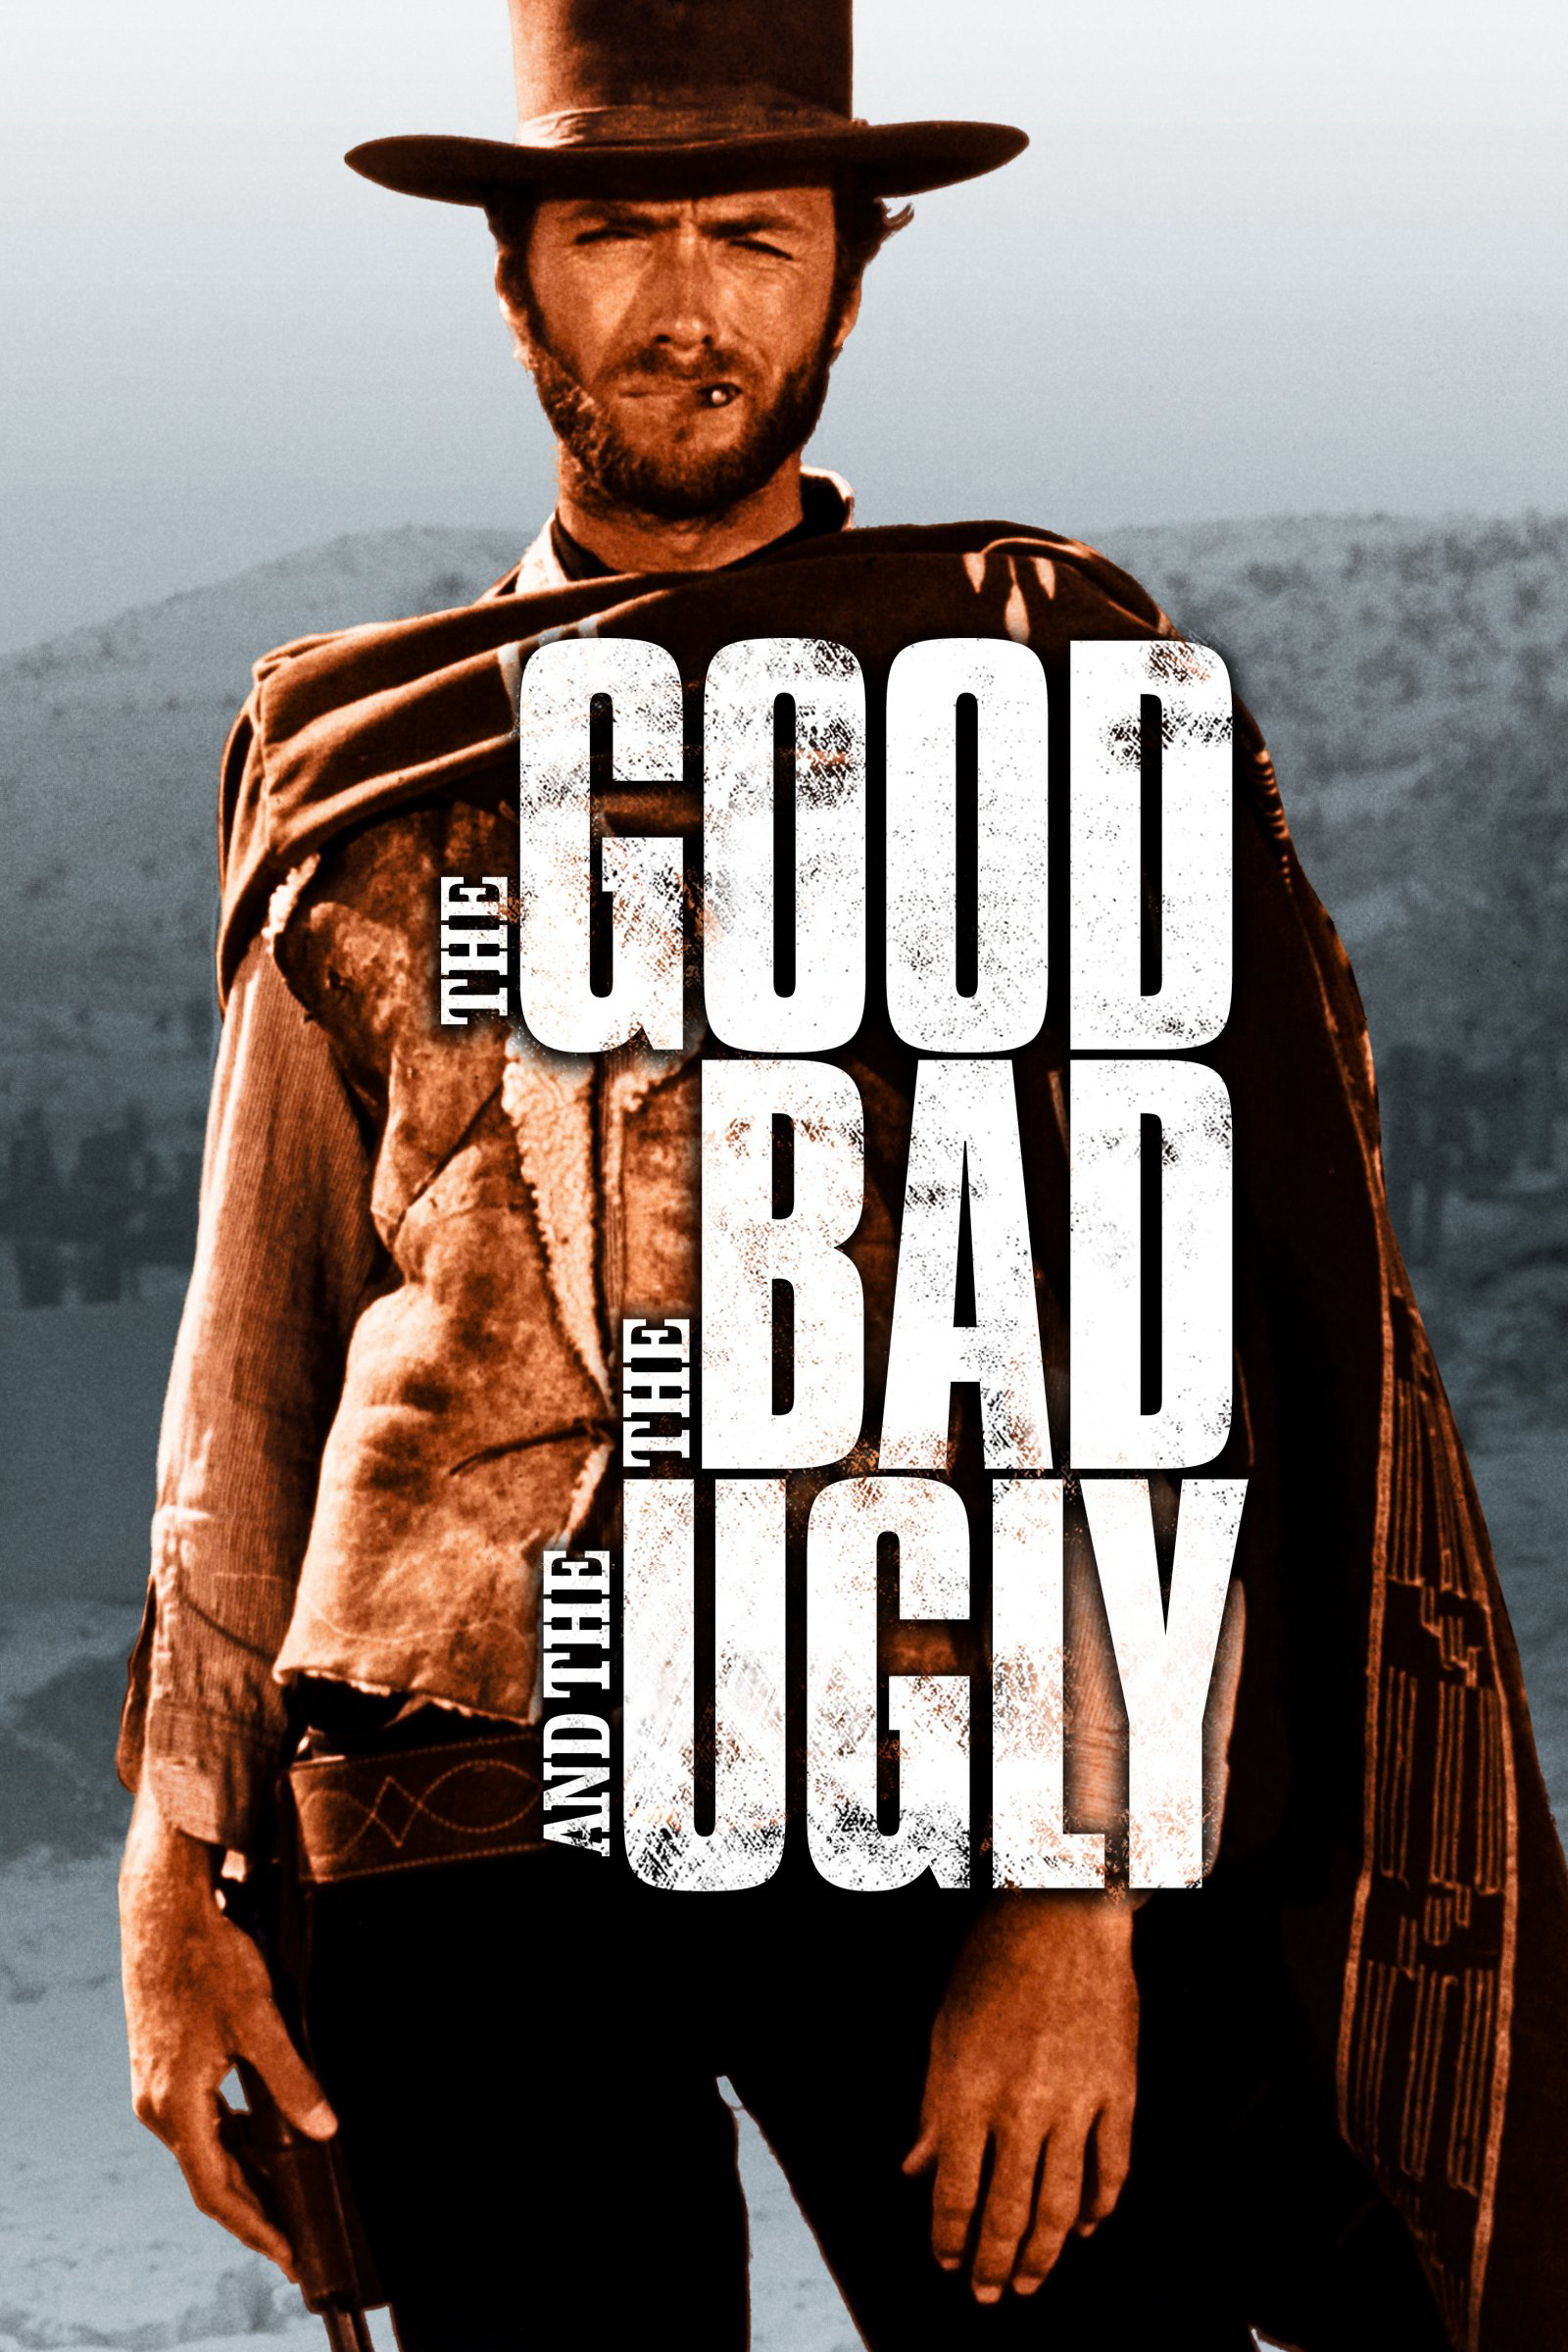 Poster Phim Thiện, Ác, Tà (The Good, the Bad and the Ugly)